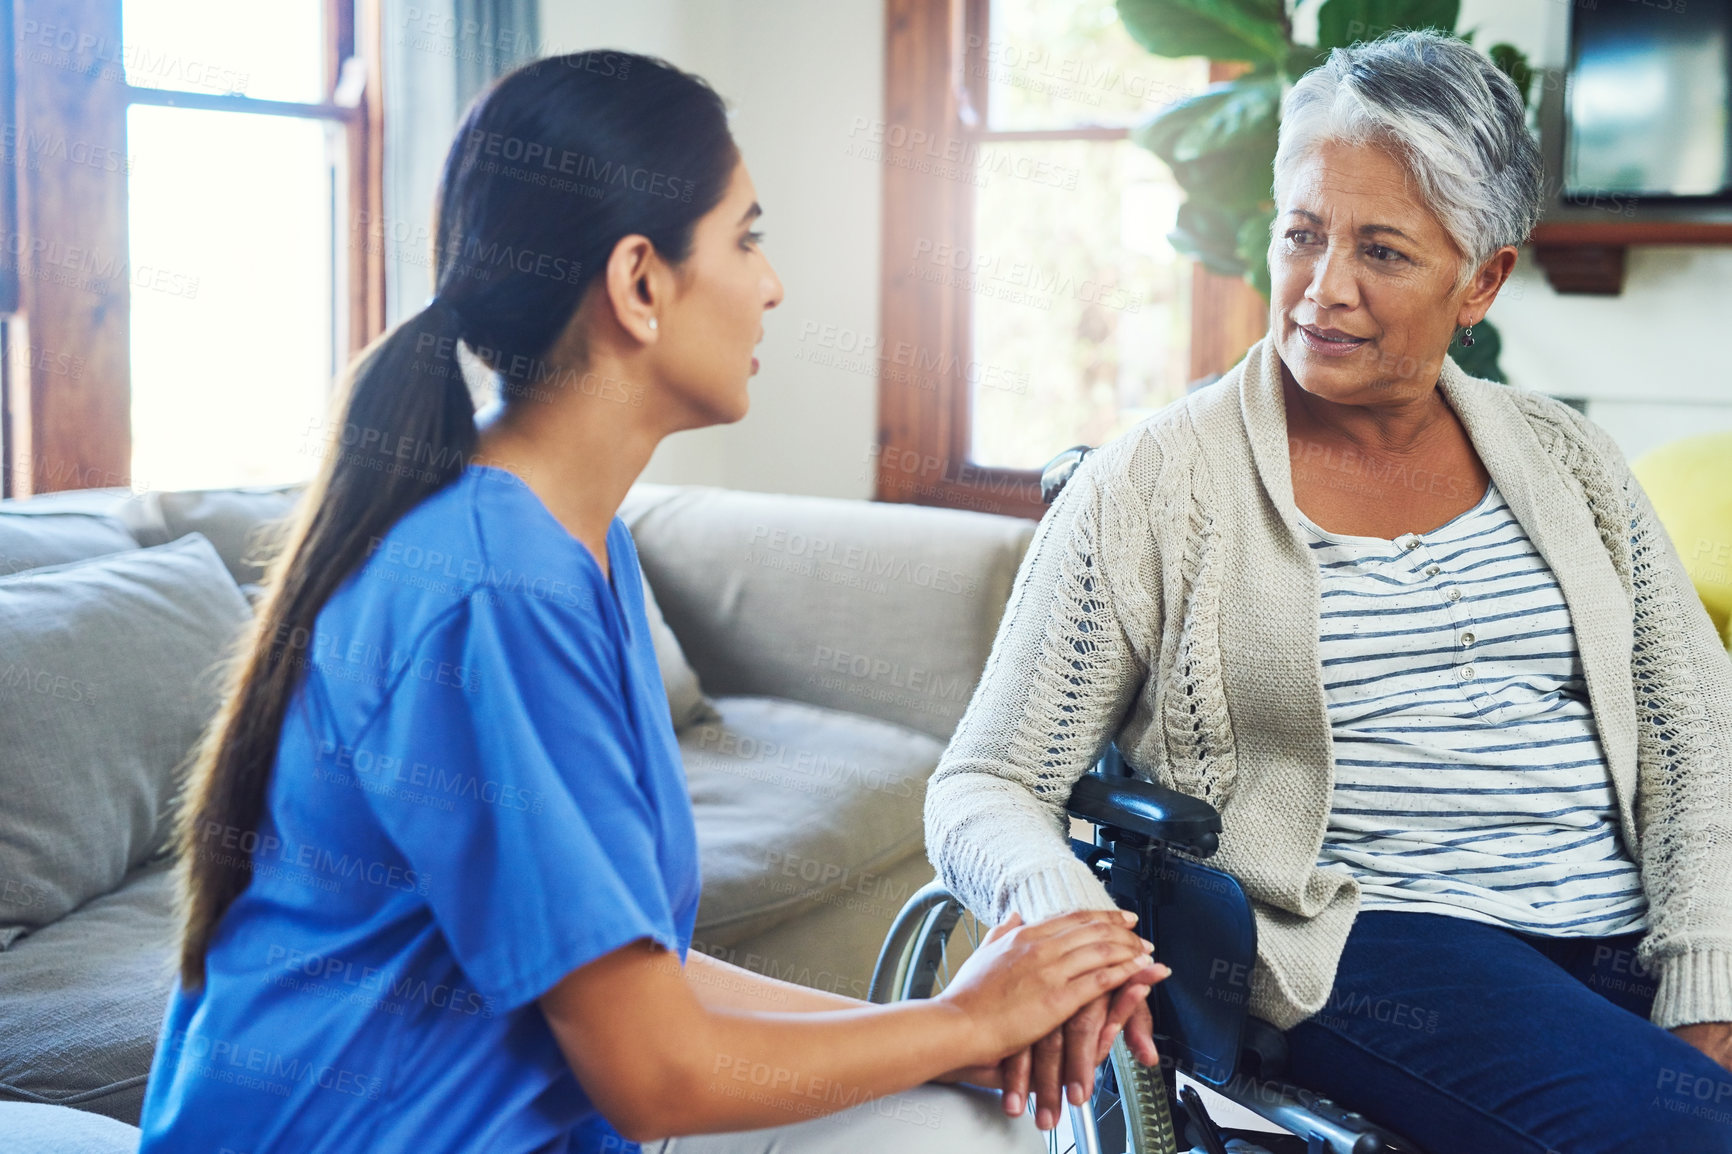 Buy stock photo Shot of a worried looking elderly woman seated in a wheelchair while a female nurse holds her hand for support inside at home during the day